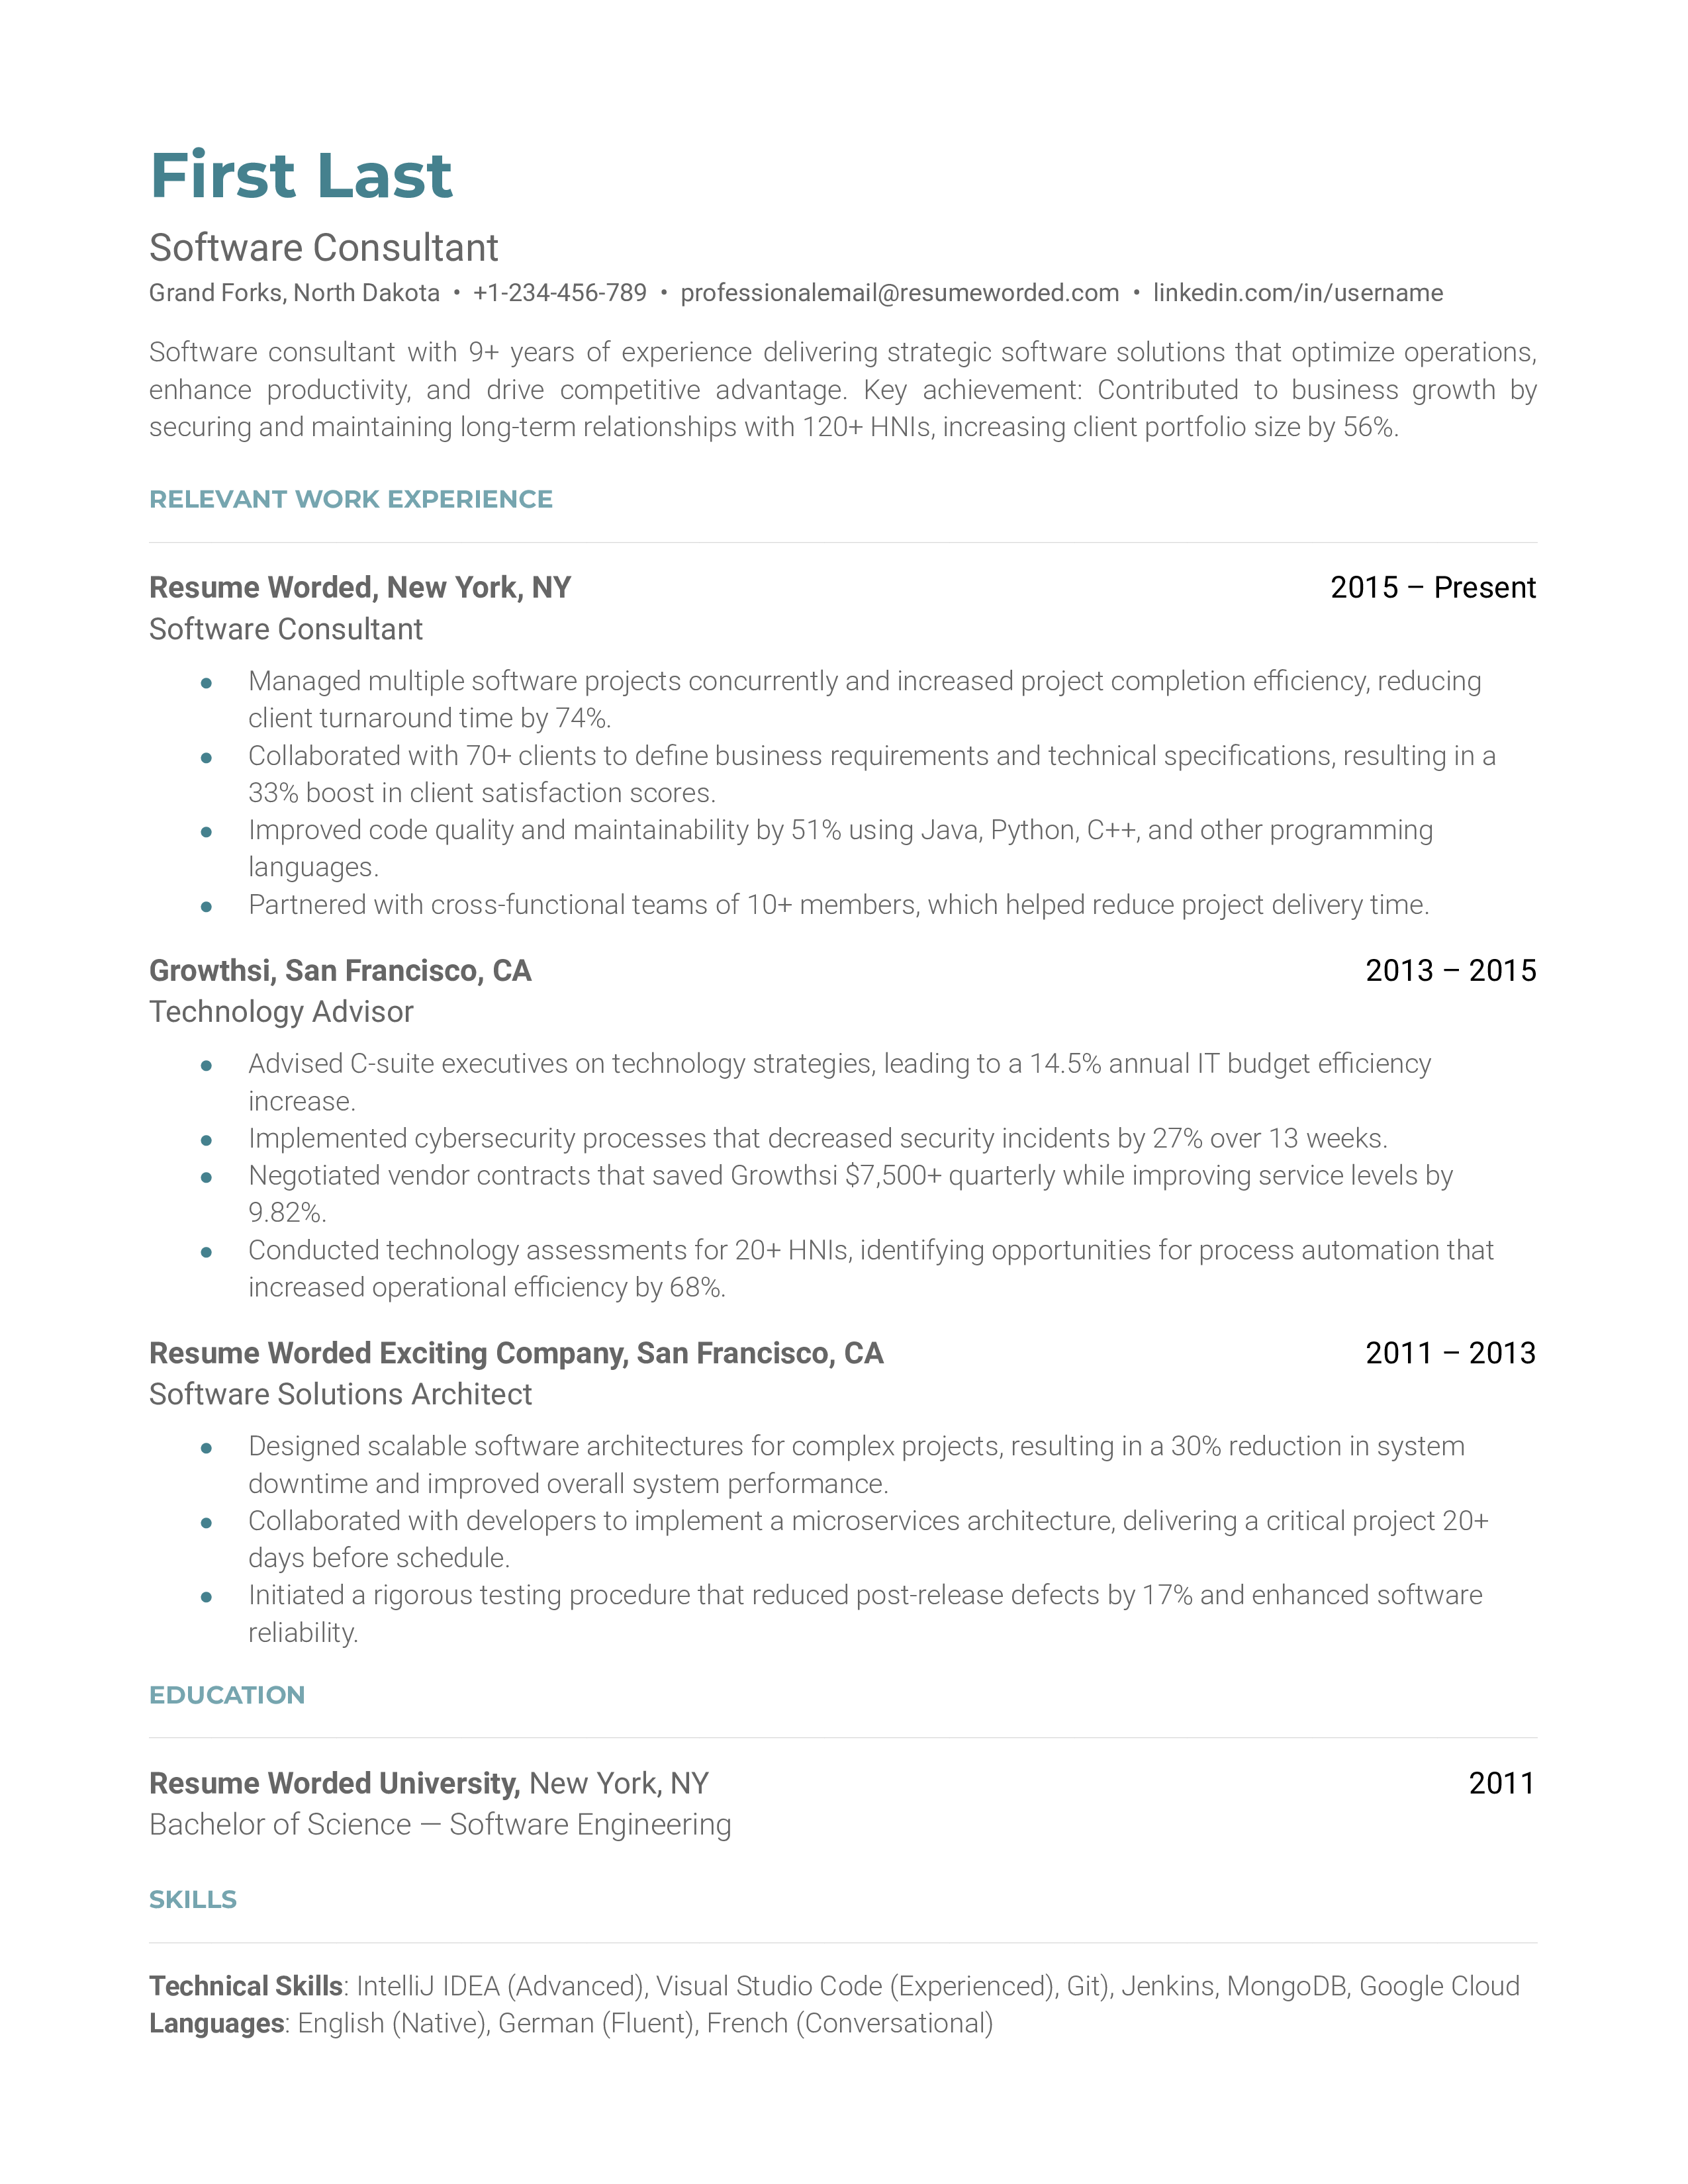 A software consultant's resume showcasing technical proficiency and problem-solving skills.